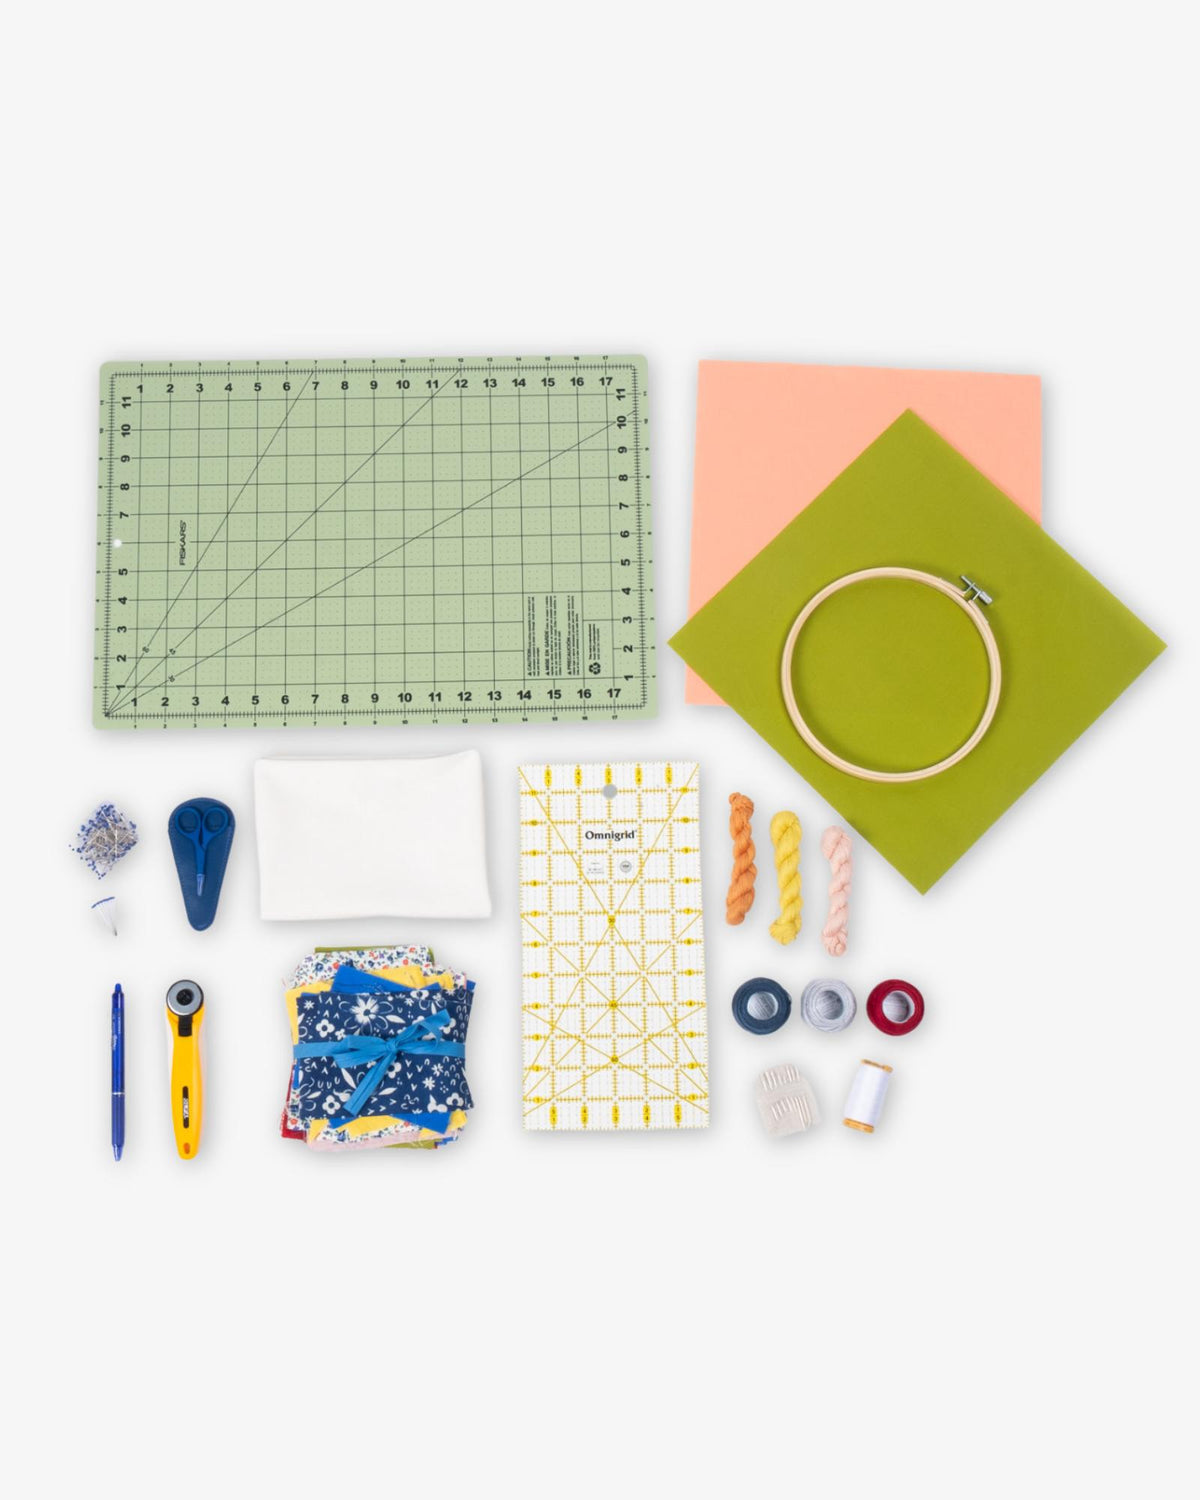 Hand-Sewn Quilting Series I Materials Kit